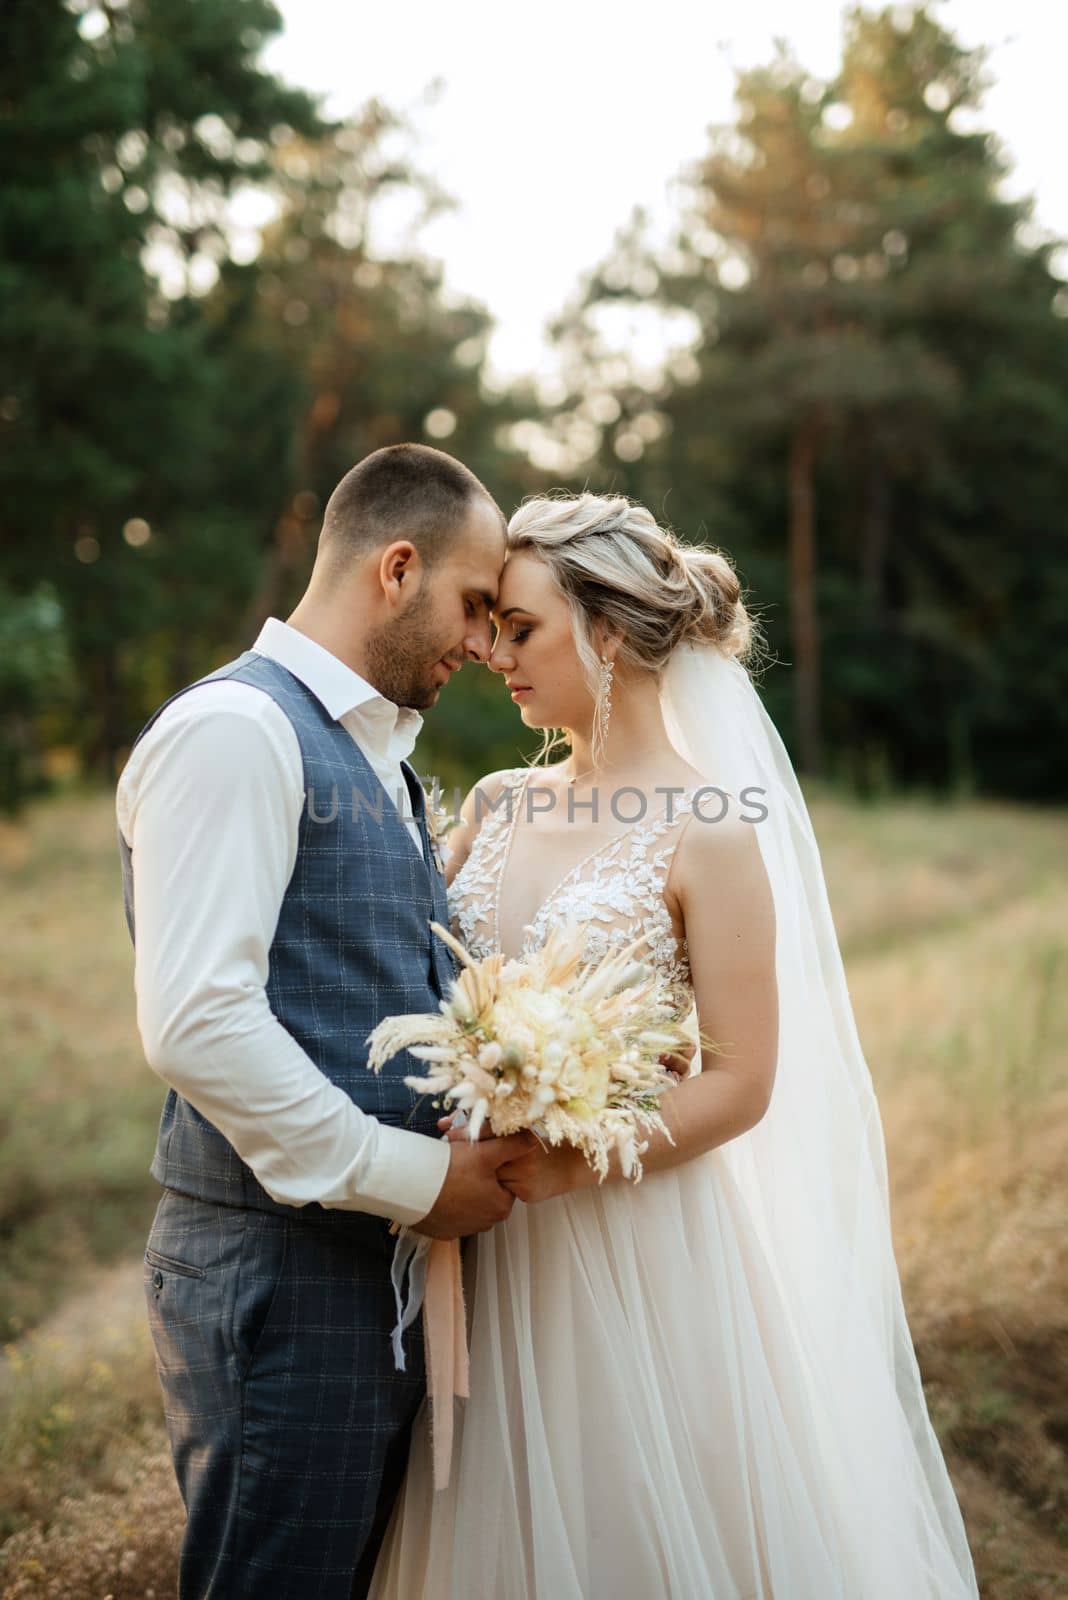 the groom and the bride are walking in the forest on a bright day